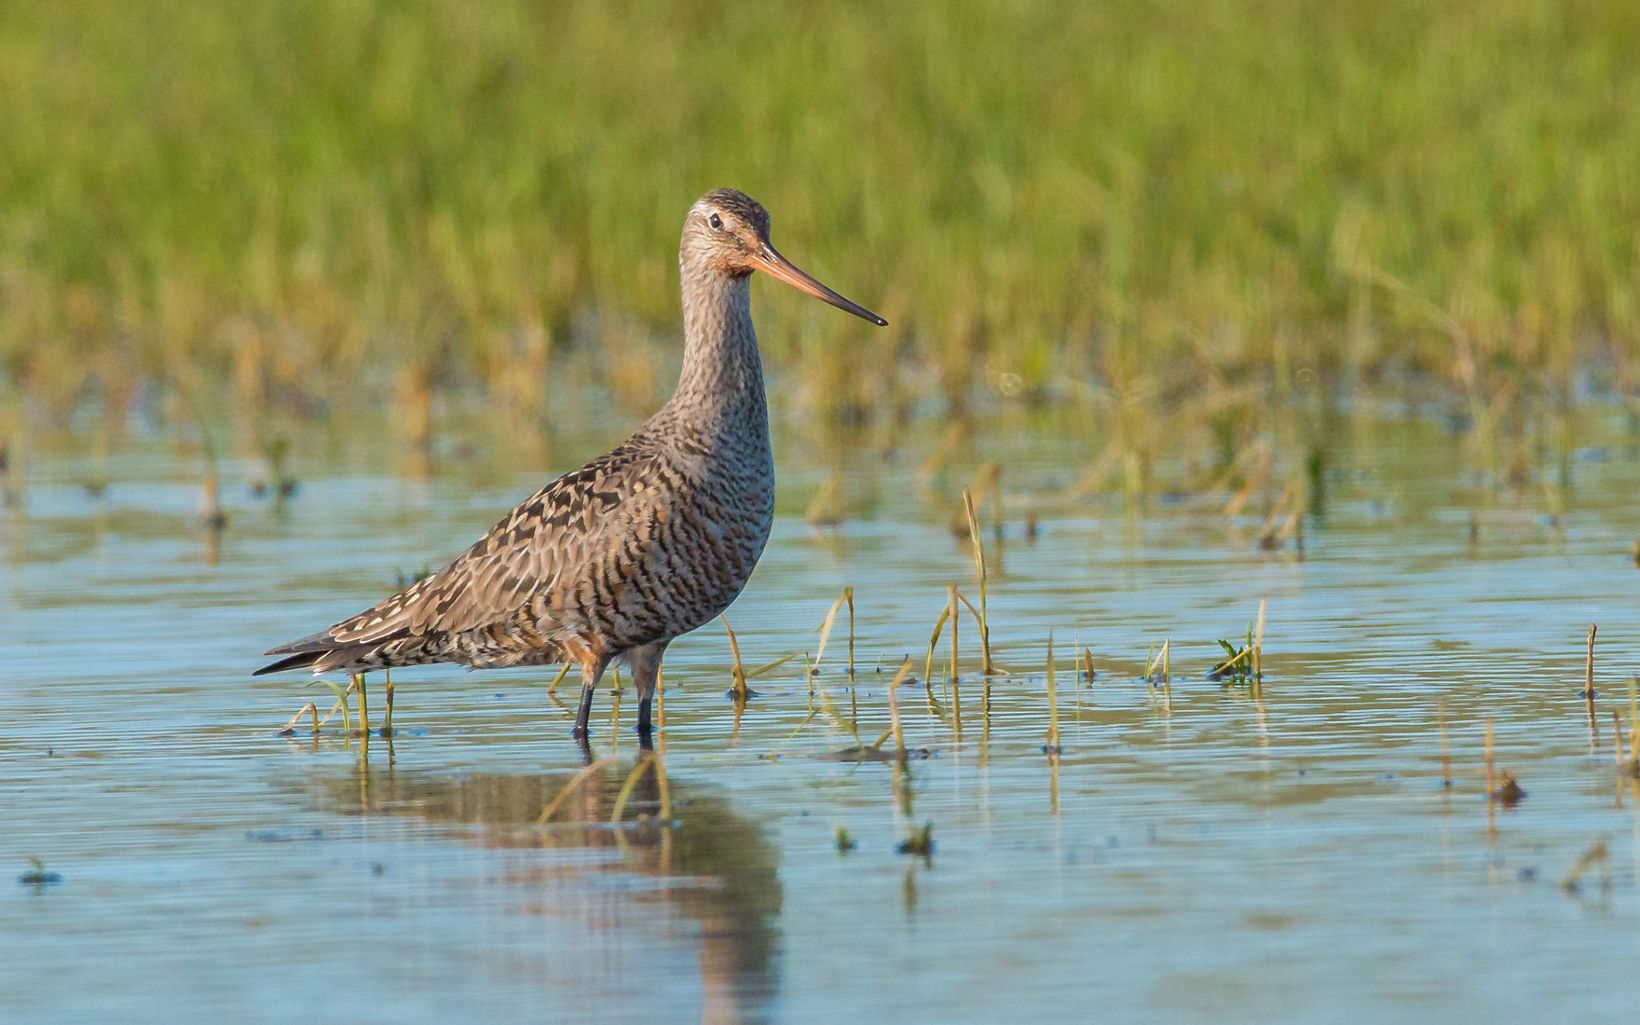 The long, flexible bill of the Hudsonian godwit helps it grab snails, worms and other prey hiding deep in thick mud.